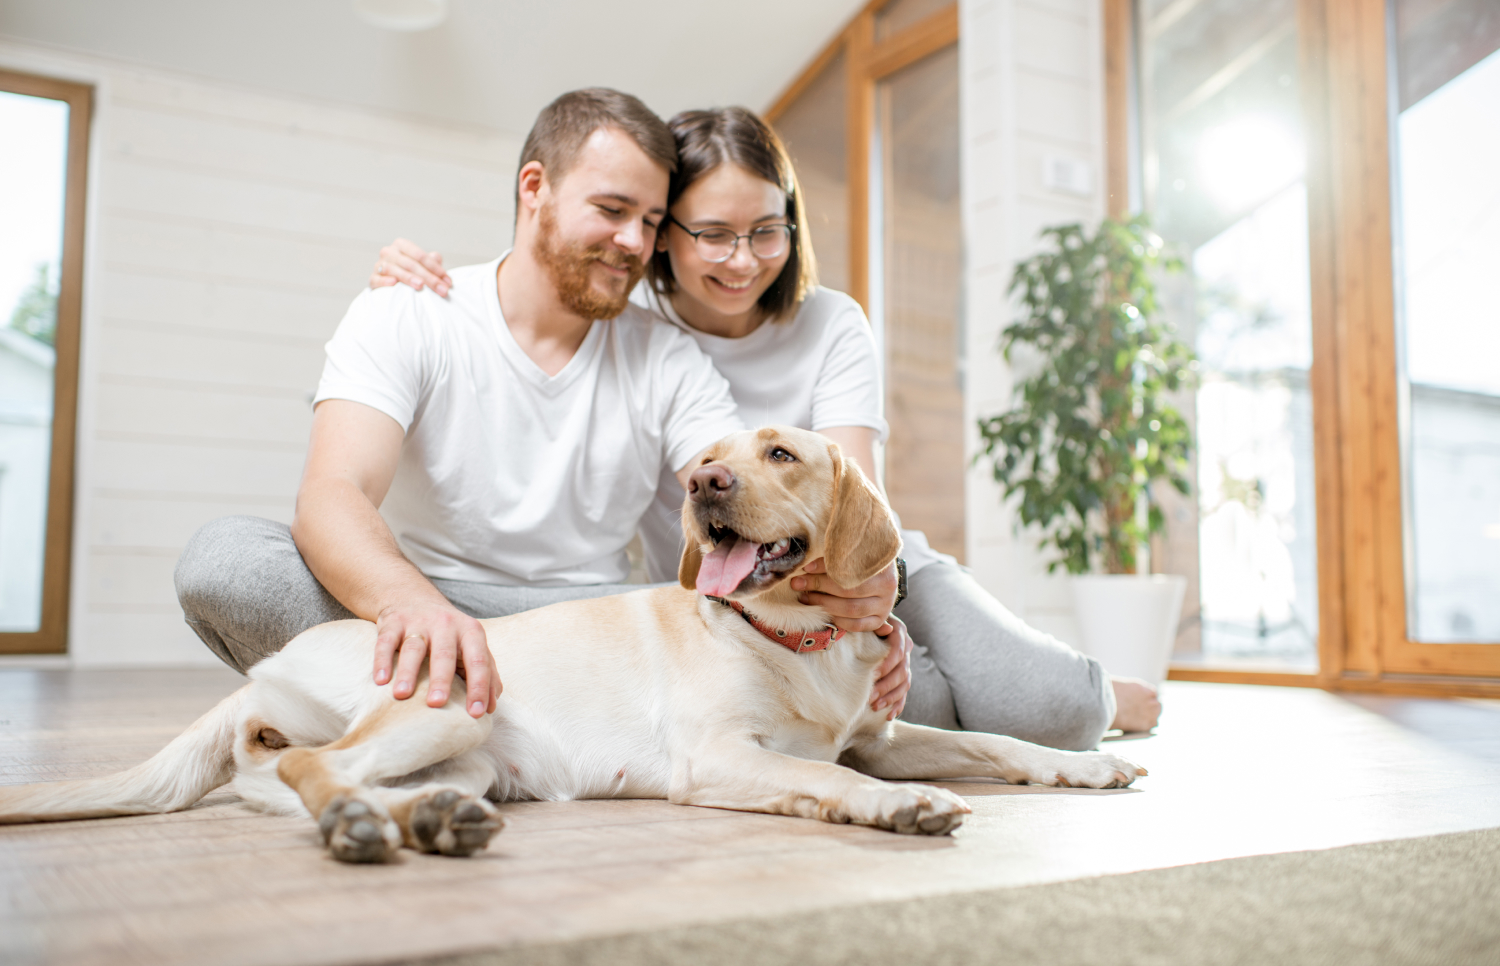 Introducing a New Dog to Your Home: 13 Tips